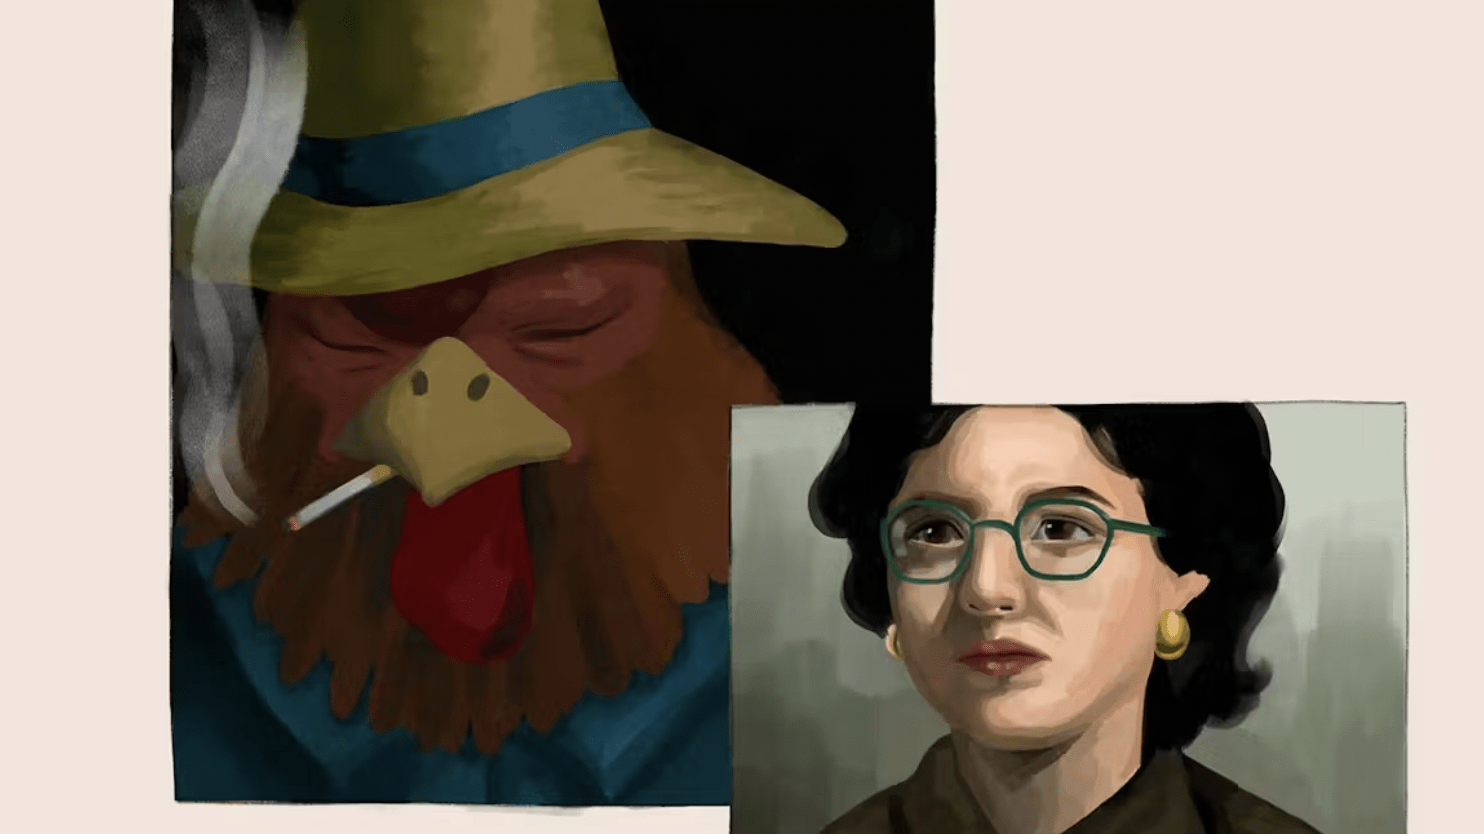 alt="Painting of rooster smoking and woman's face.">